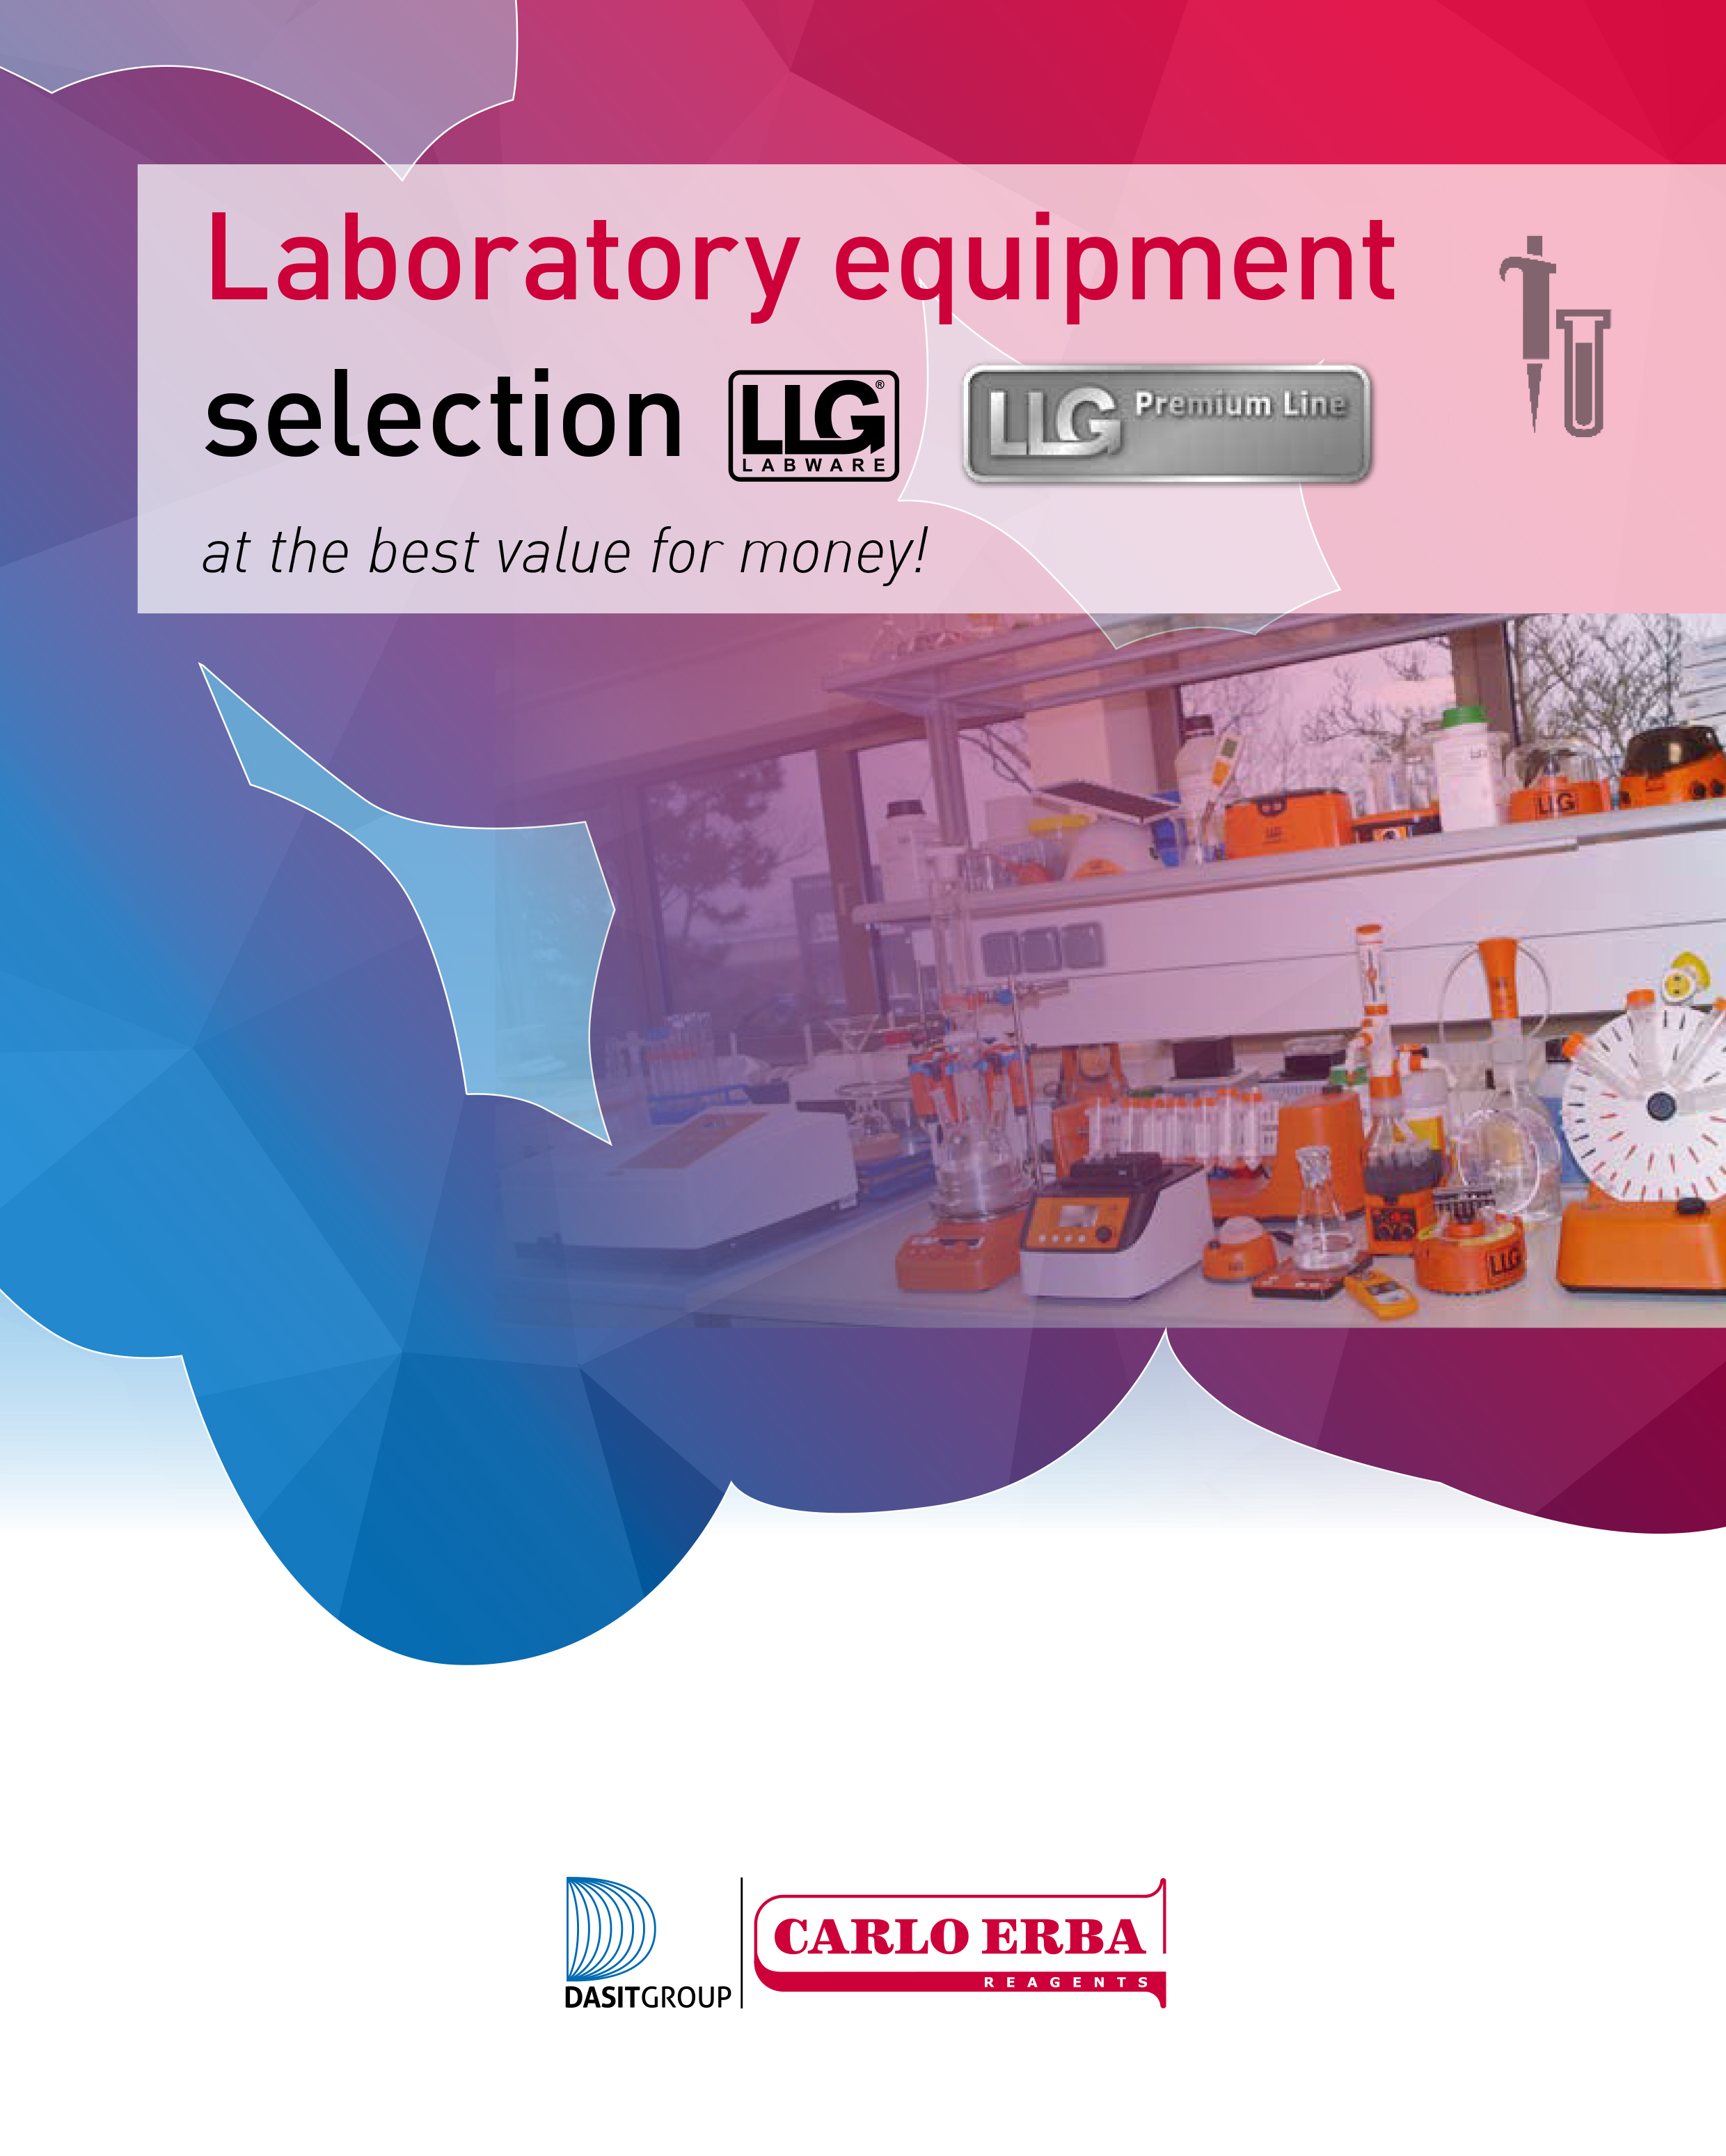 LLG Labware : Laboratory equipment selection at the best value for money!